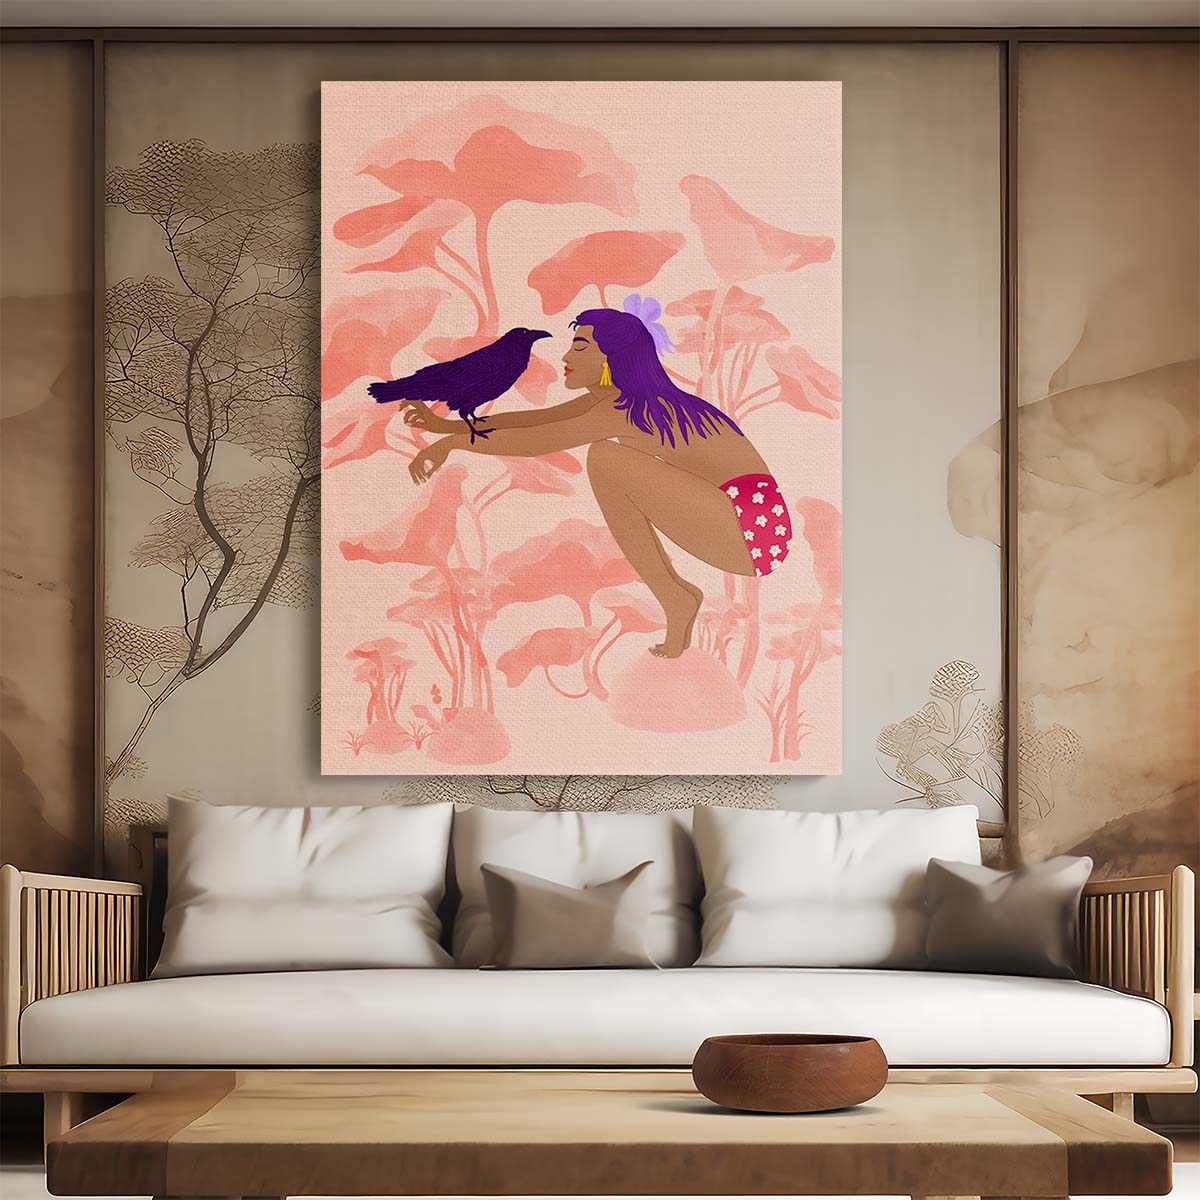 Dreamy Abstract Illustration of Woman with Raven in Vibrant Colours by Luxuriance Designs, made in USA